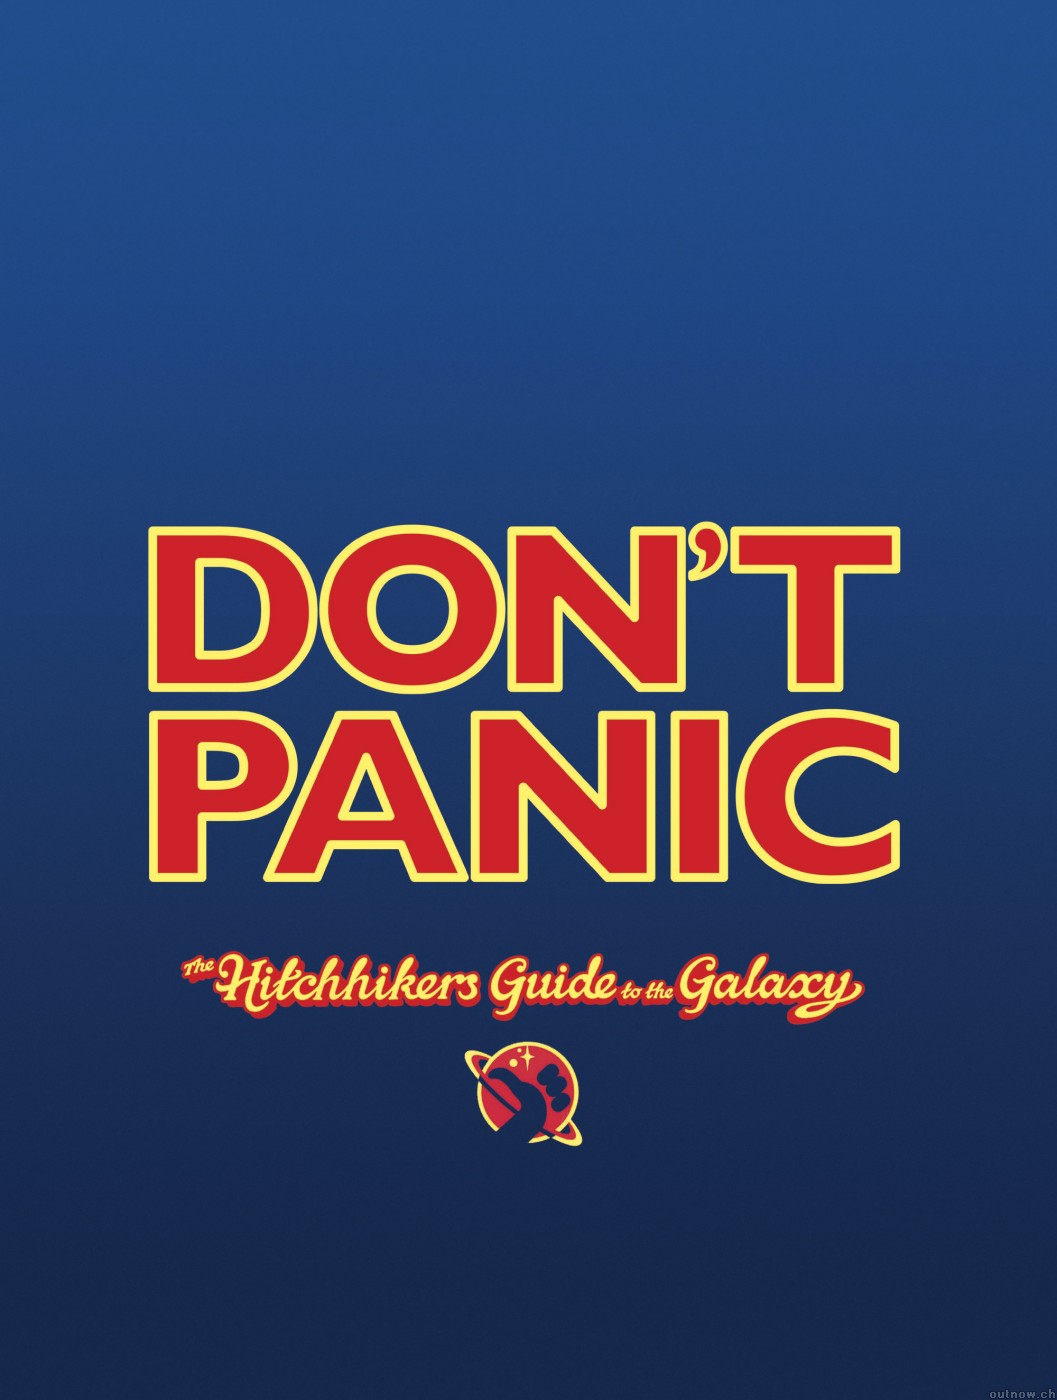 hitchhikers_guide_to_the_galaxy.jpg